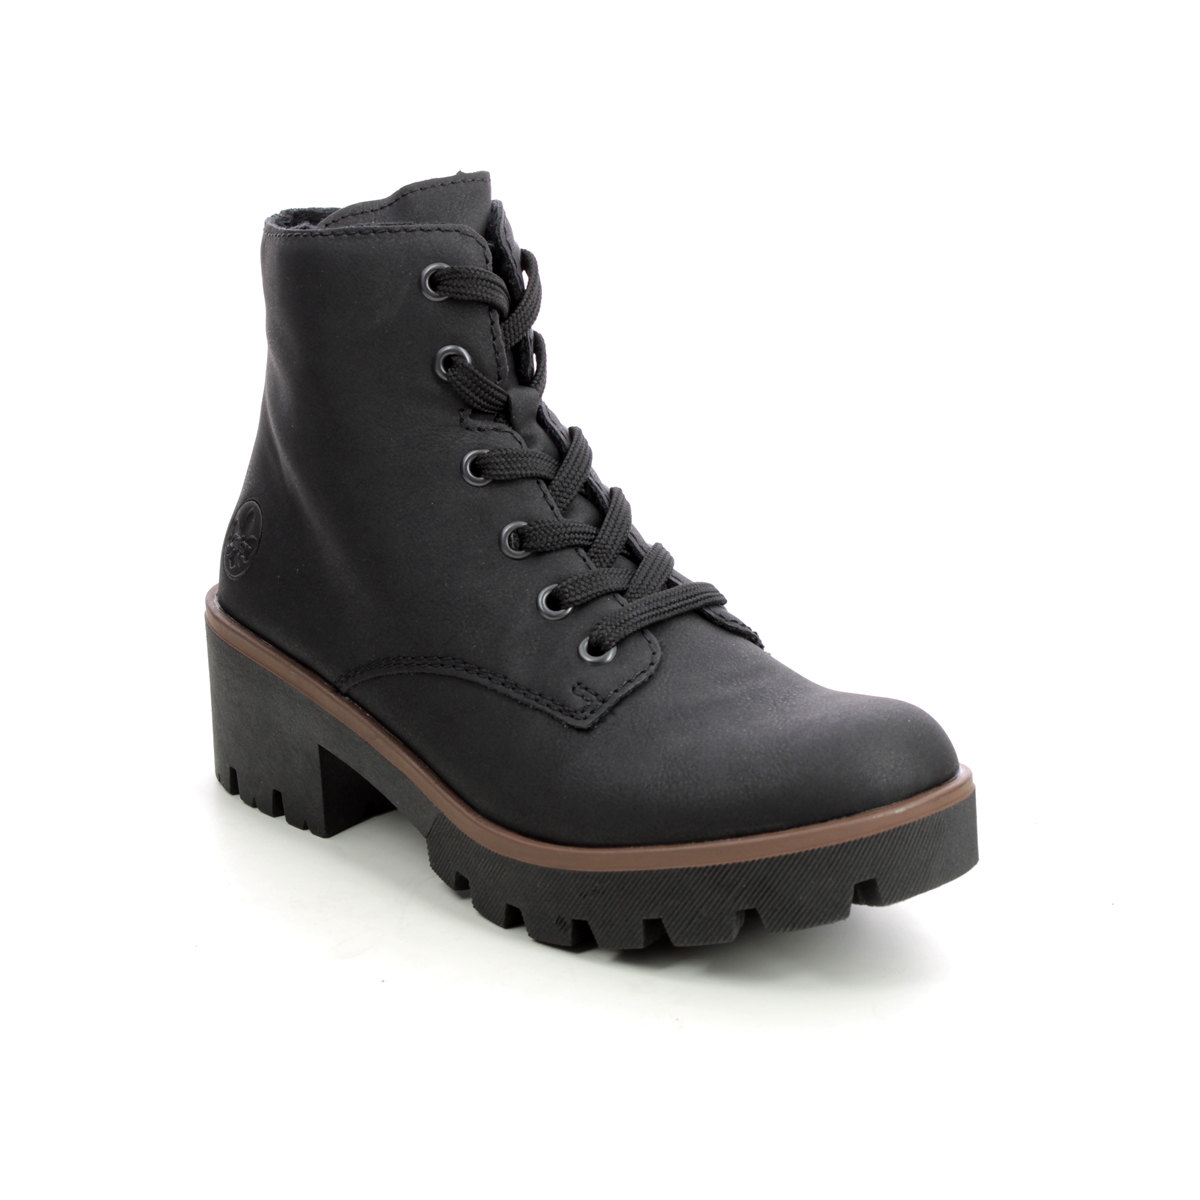 Rieker 79240-00 Black Womens Lace Up Boots in a Plain Man-made in Size 37